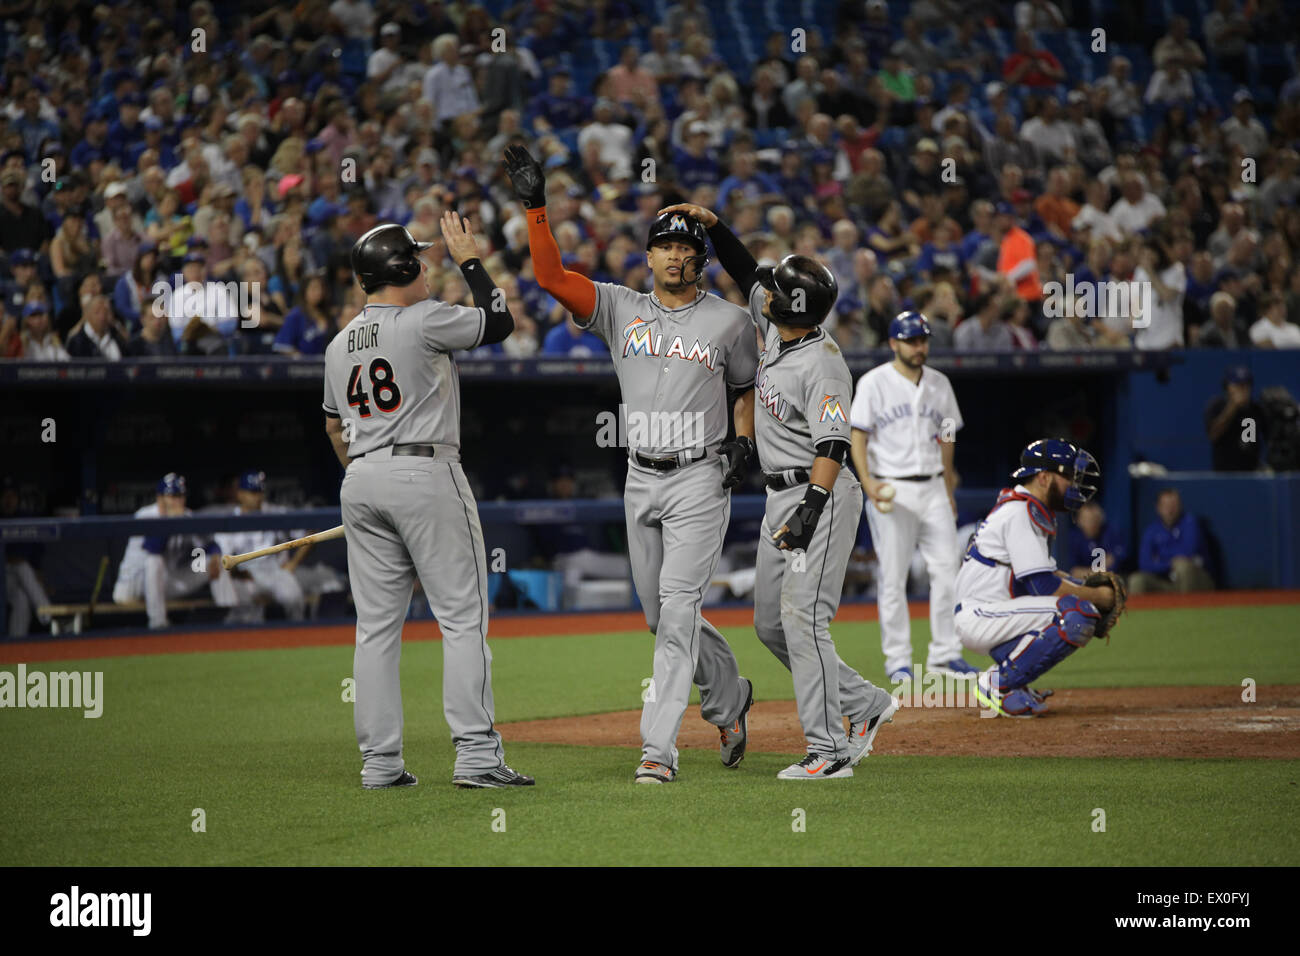 Miami Marlins players congratulate each other on scoring a run Stock Photo